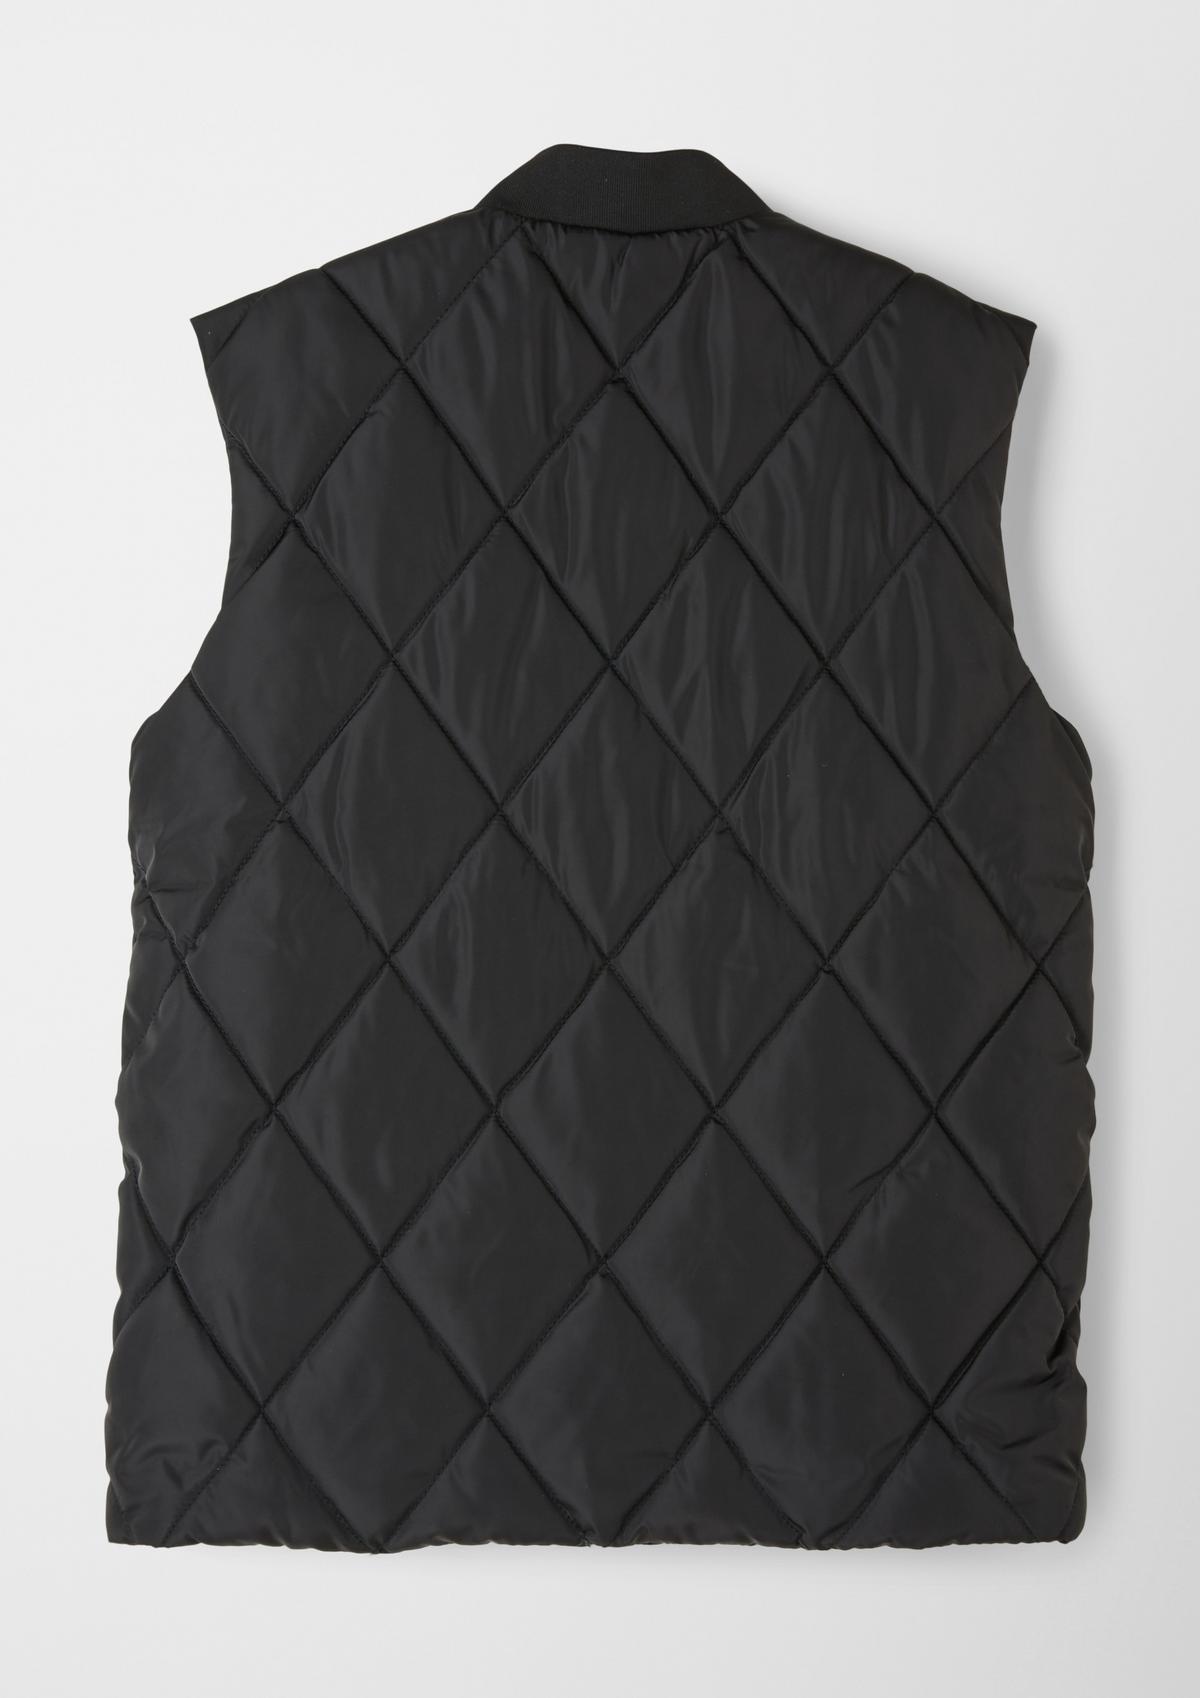 s.Oliver Quilted body warmer with fleece lining